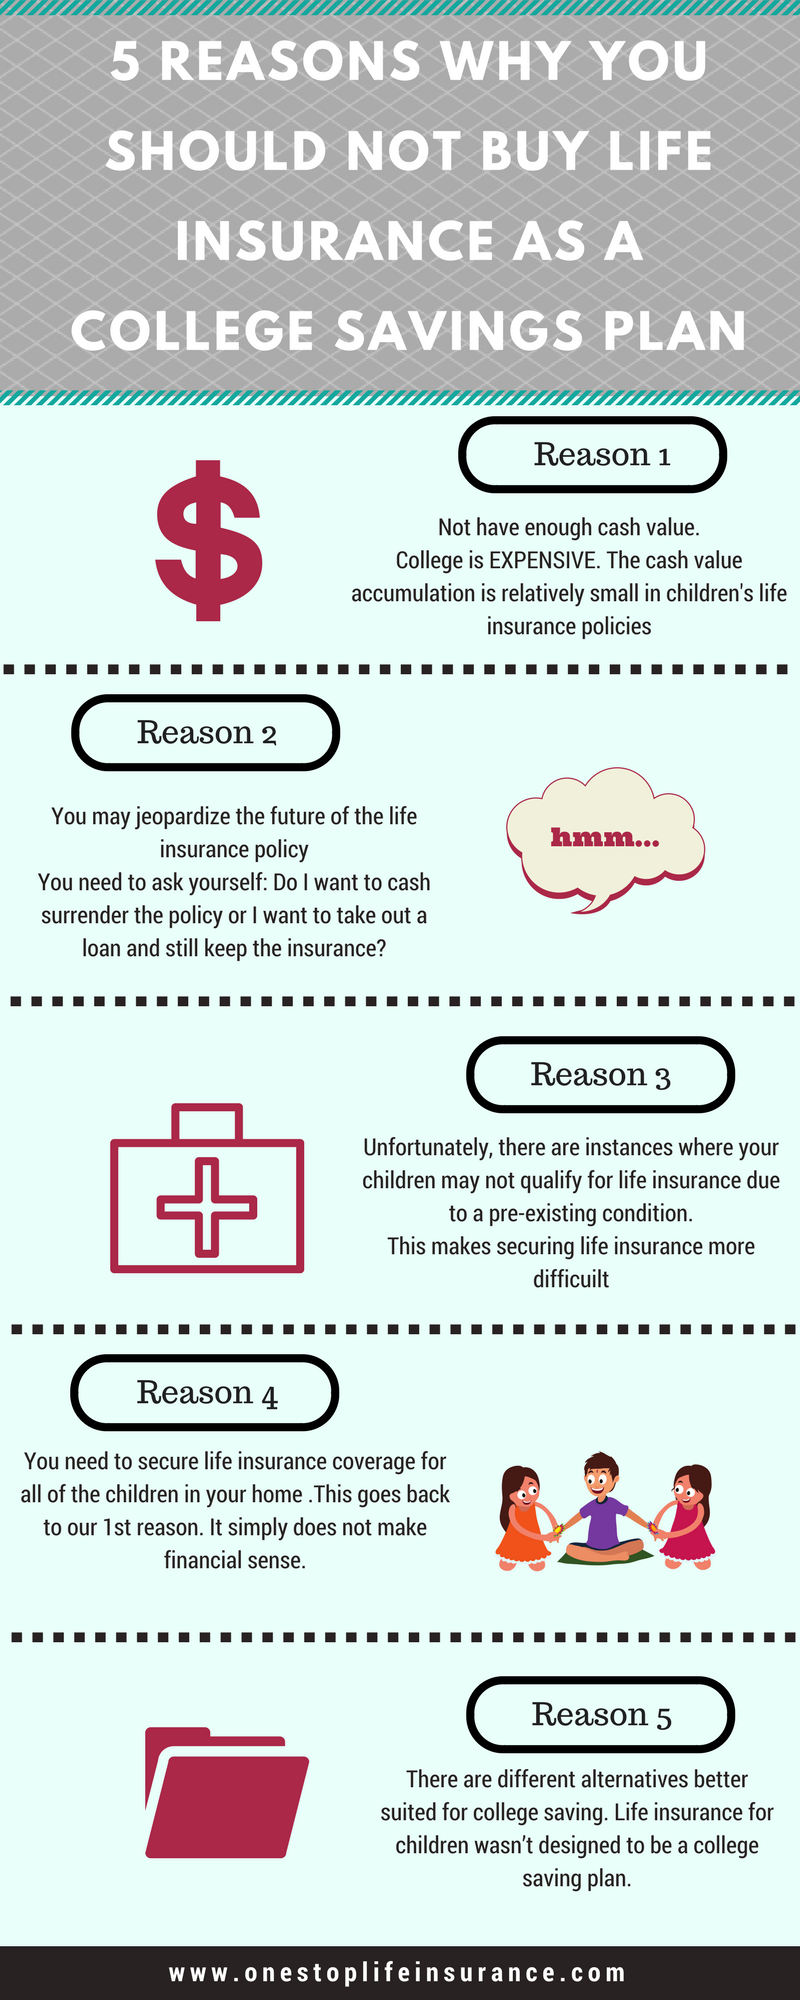 Infographic with 5 reasons why you should not buy life insurance as a college savings plan